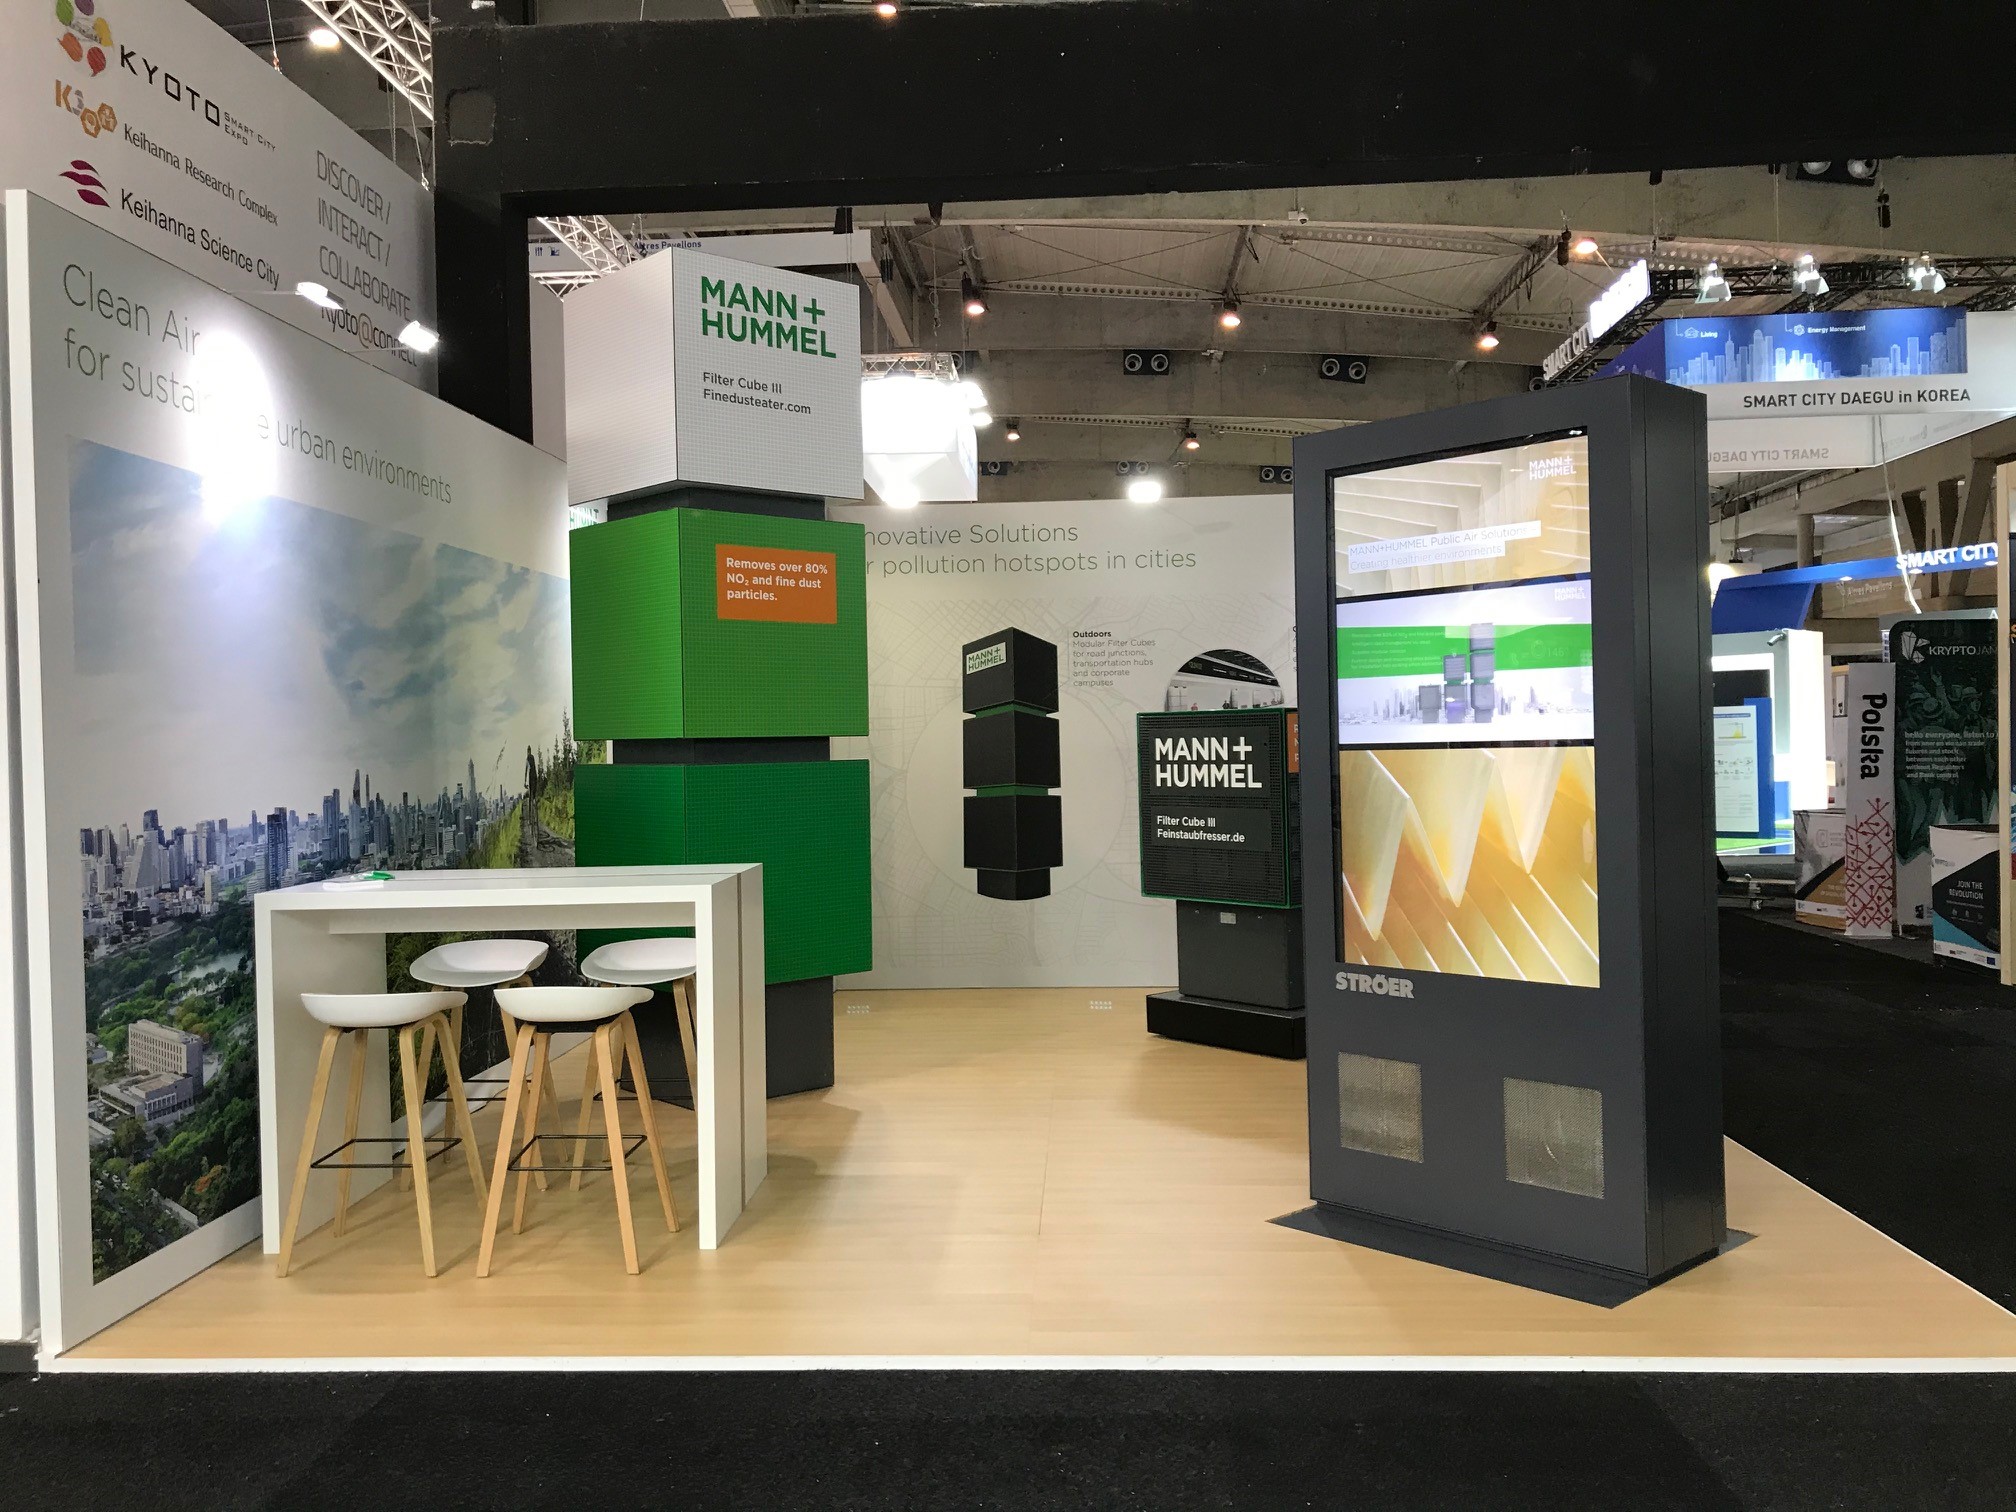 The Mann+Hummel stand at the recent Smart City Expo World Congress, where the digital screen with integrated filter made its debut.